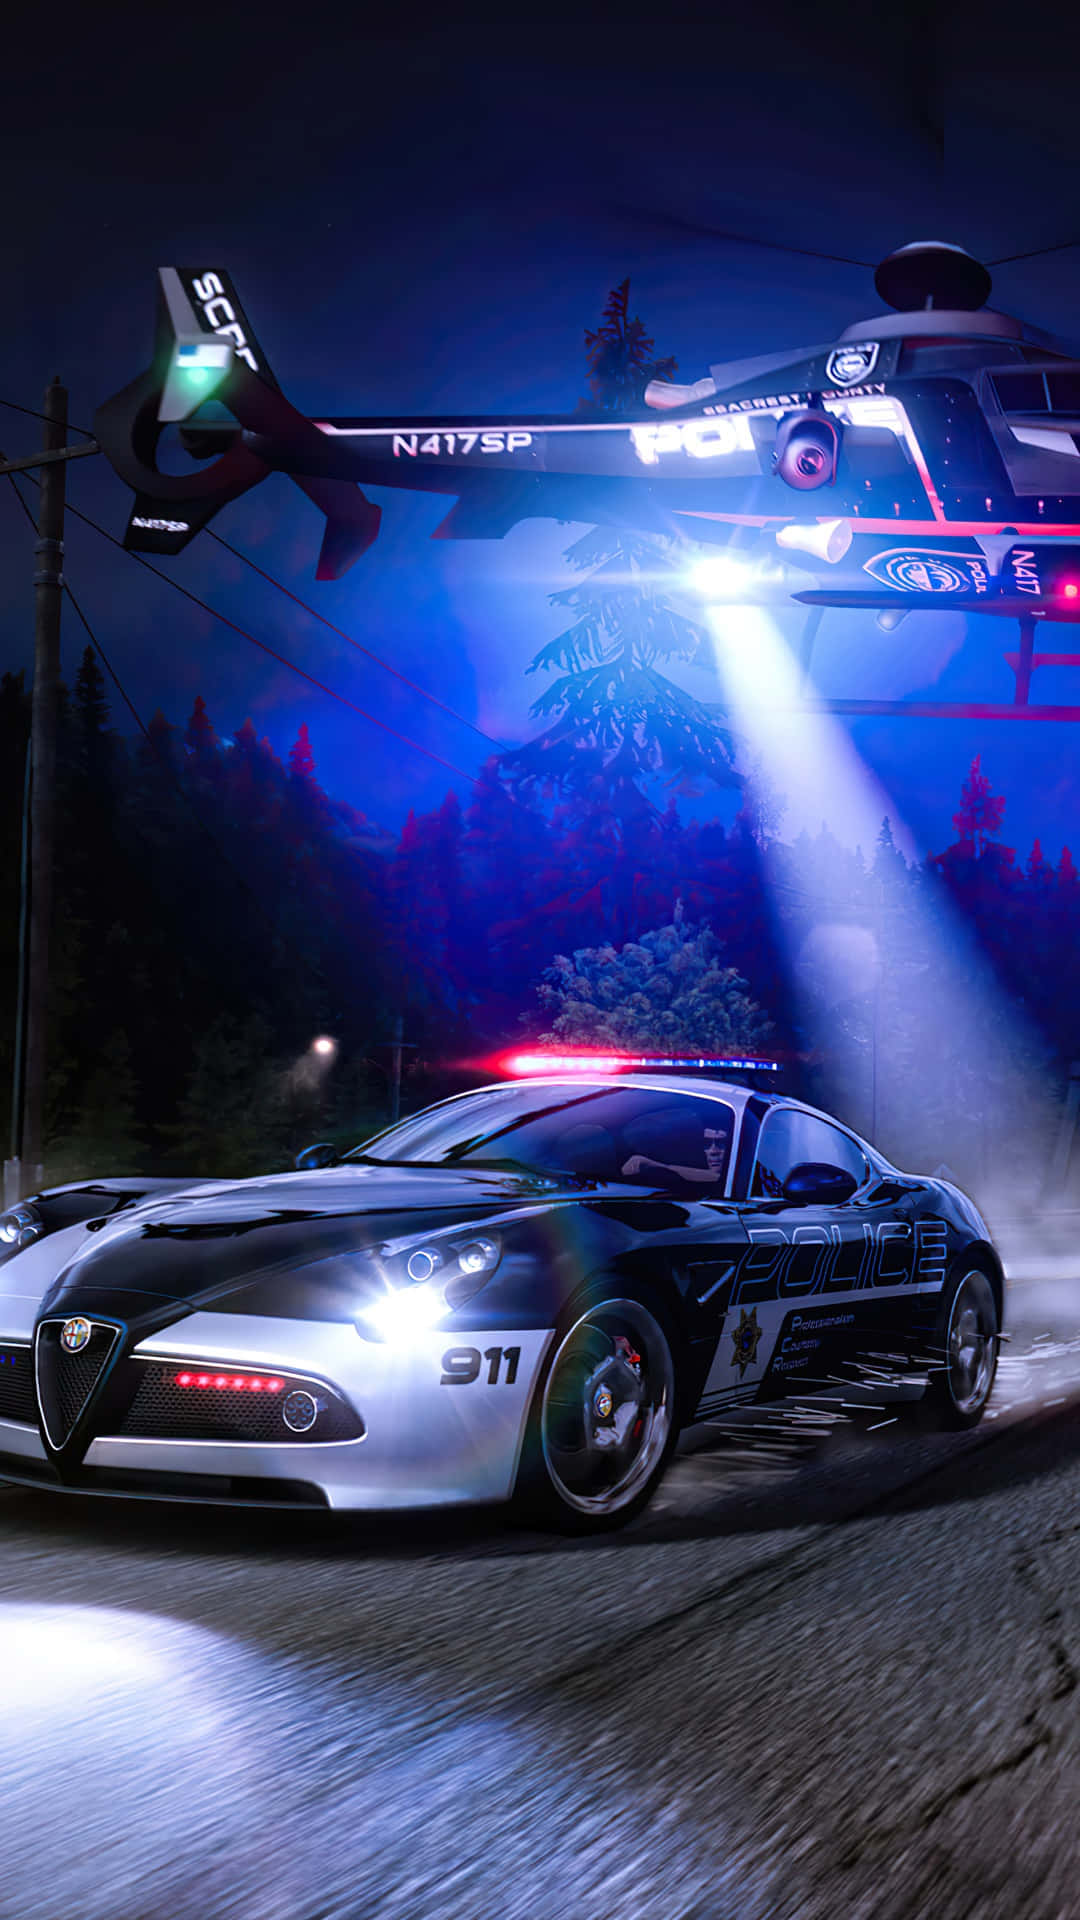 Caption: Thrilling Speed - Pixel 3 Need For Speed Wallpaper